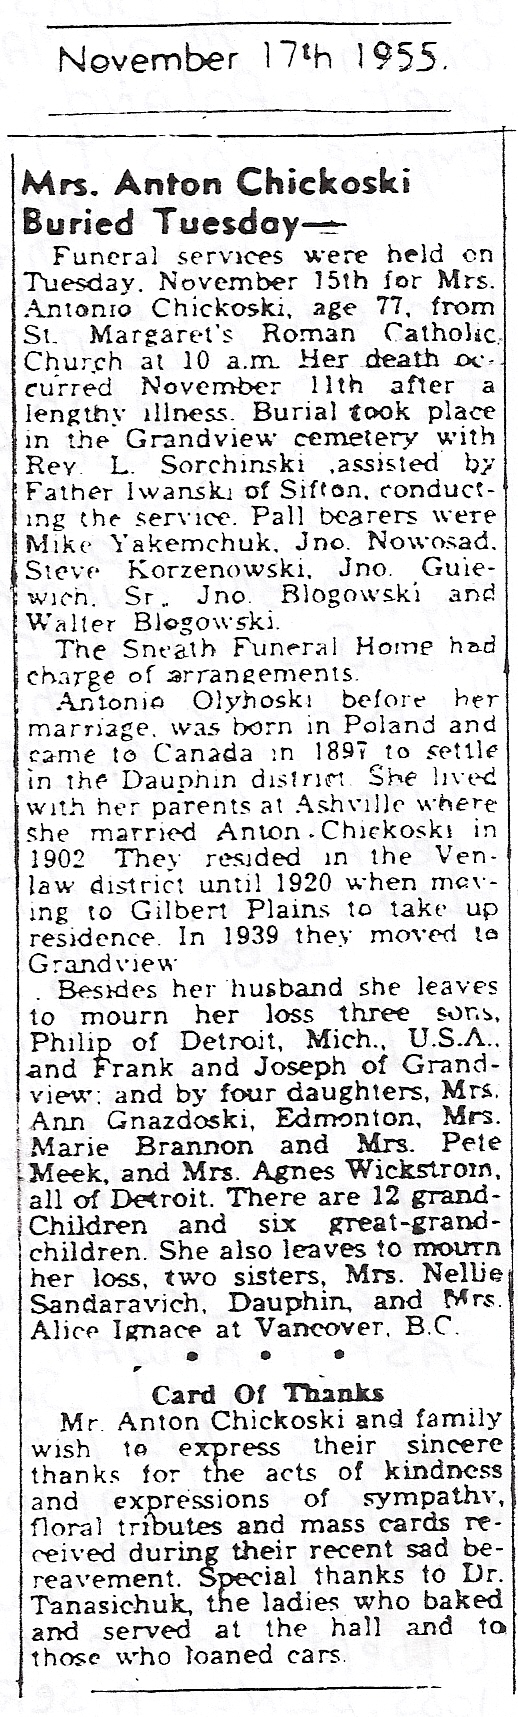 Antons wifes obituary